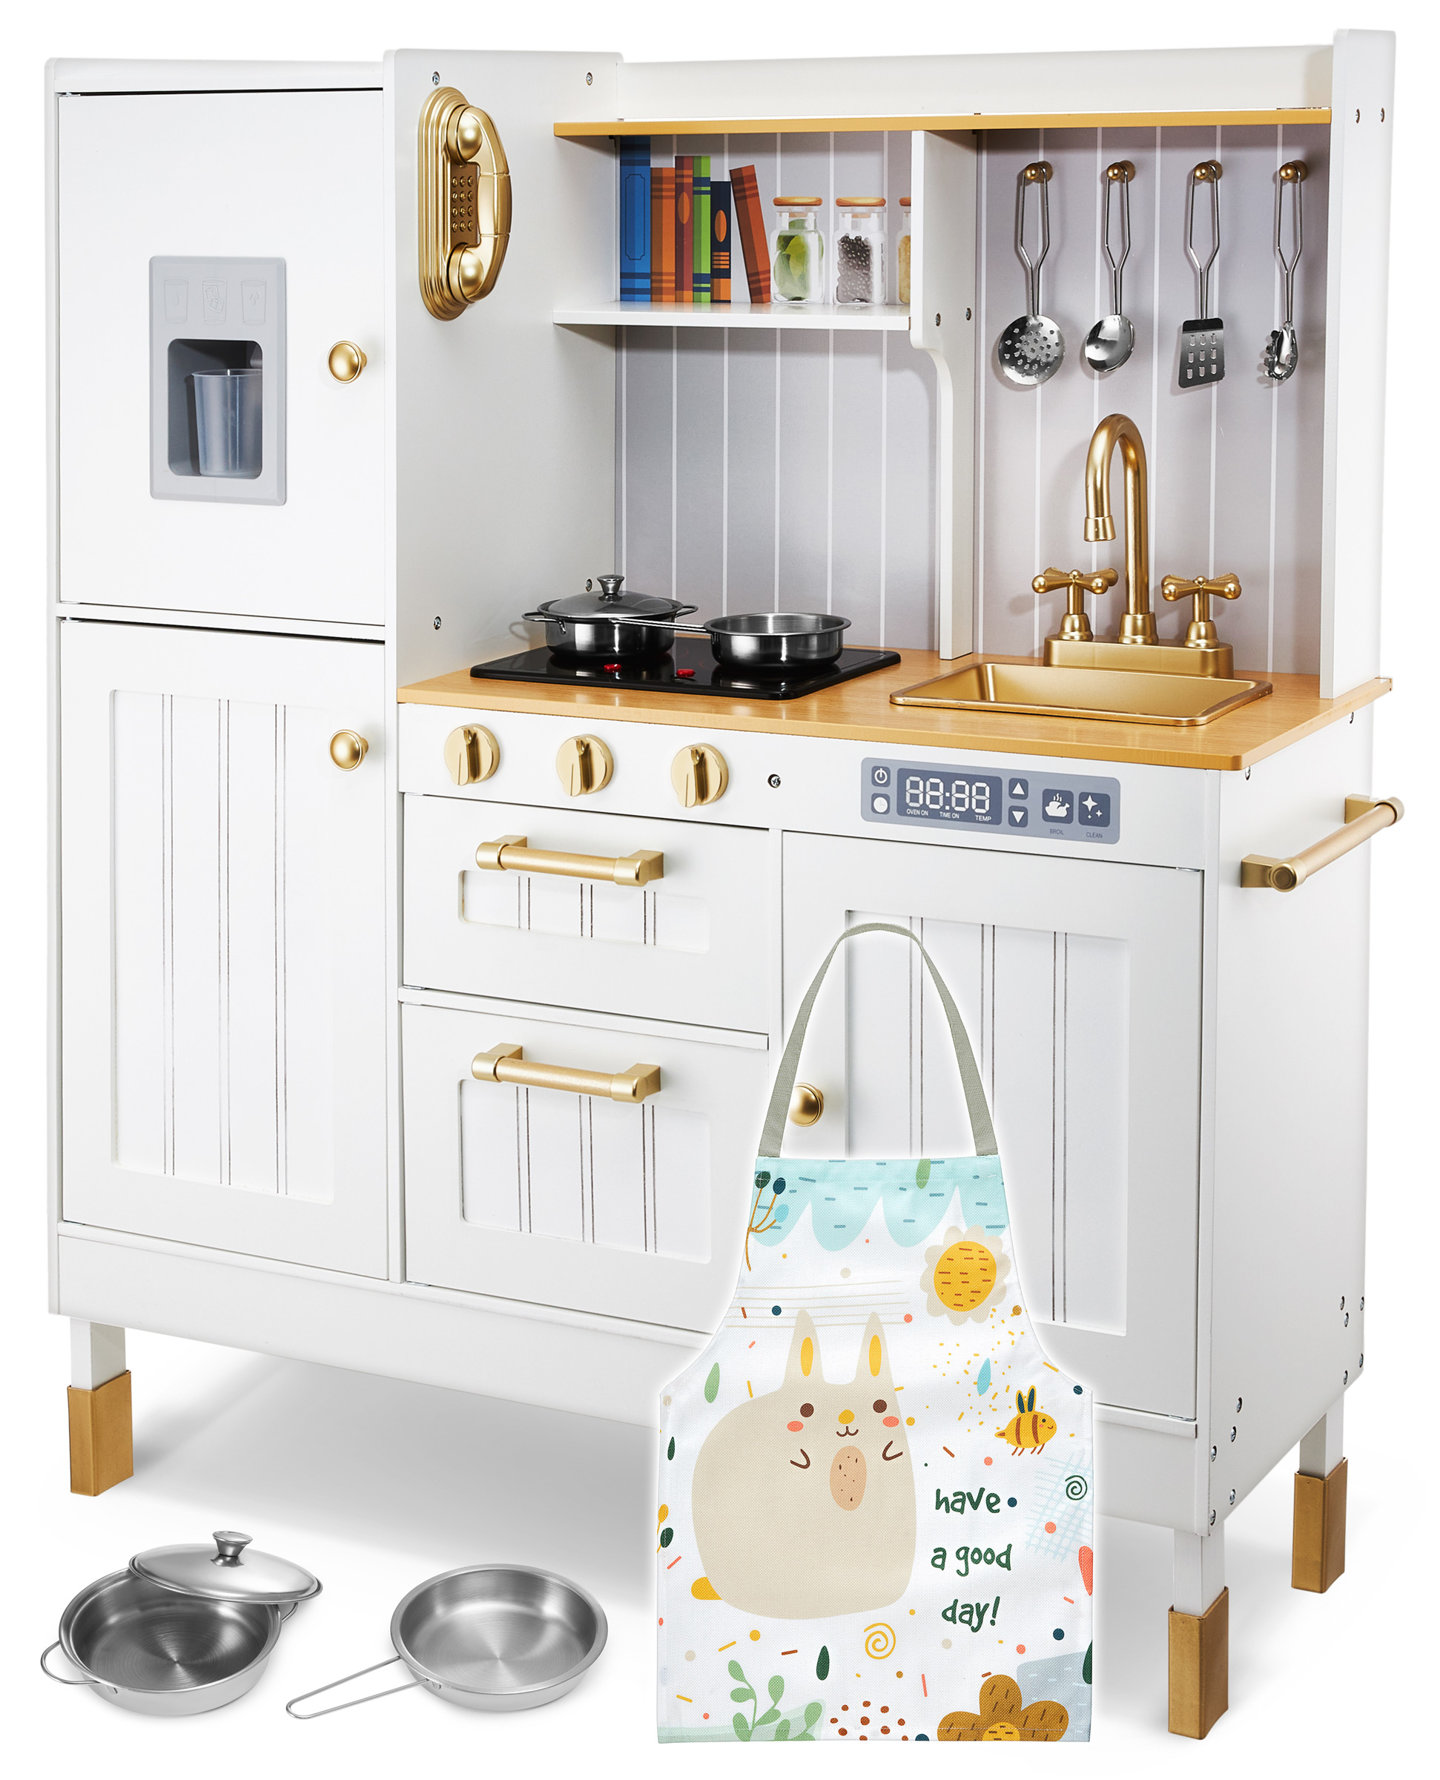 XL Two-tier Wooden Kitchen with apron and accessories